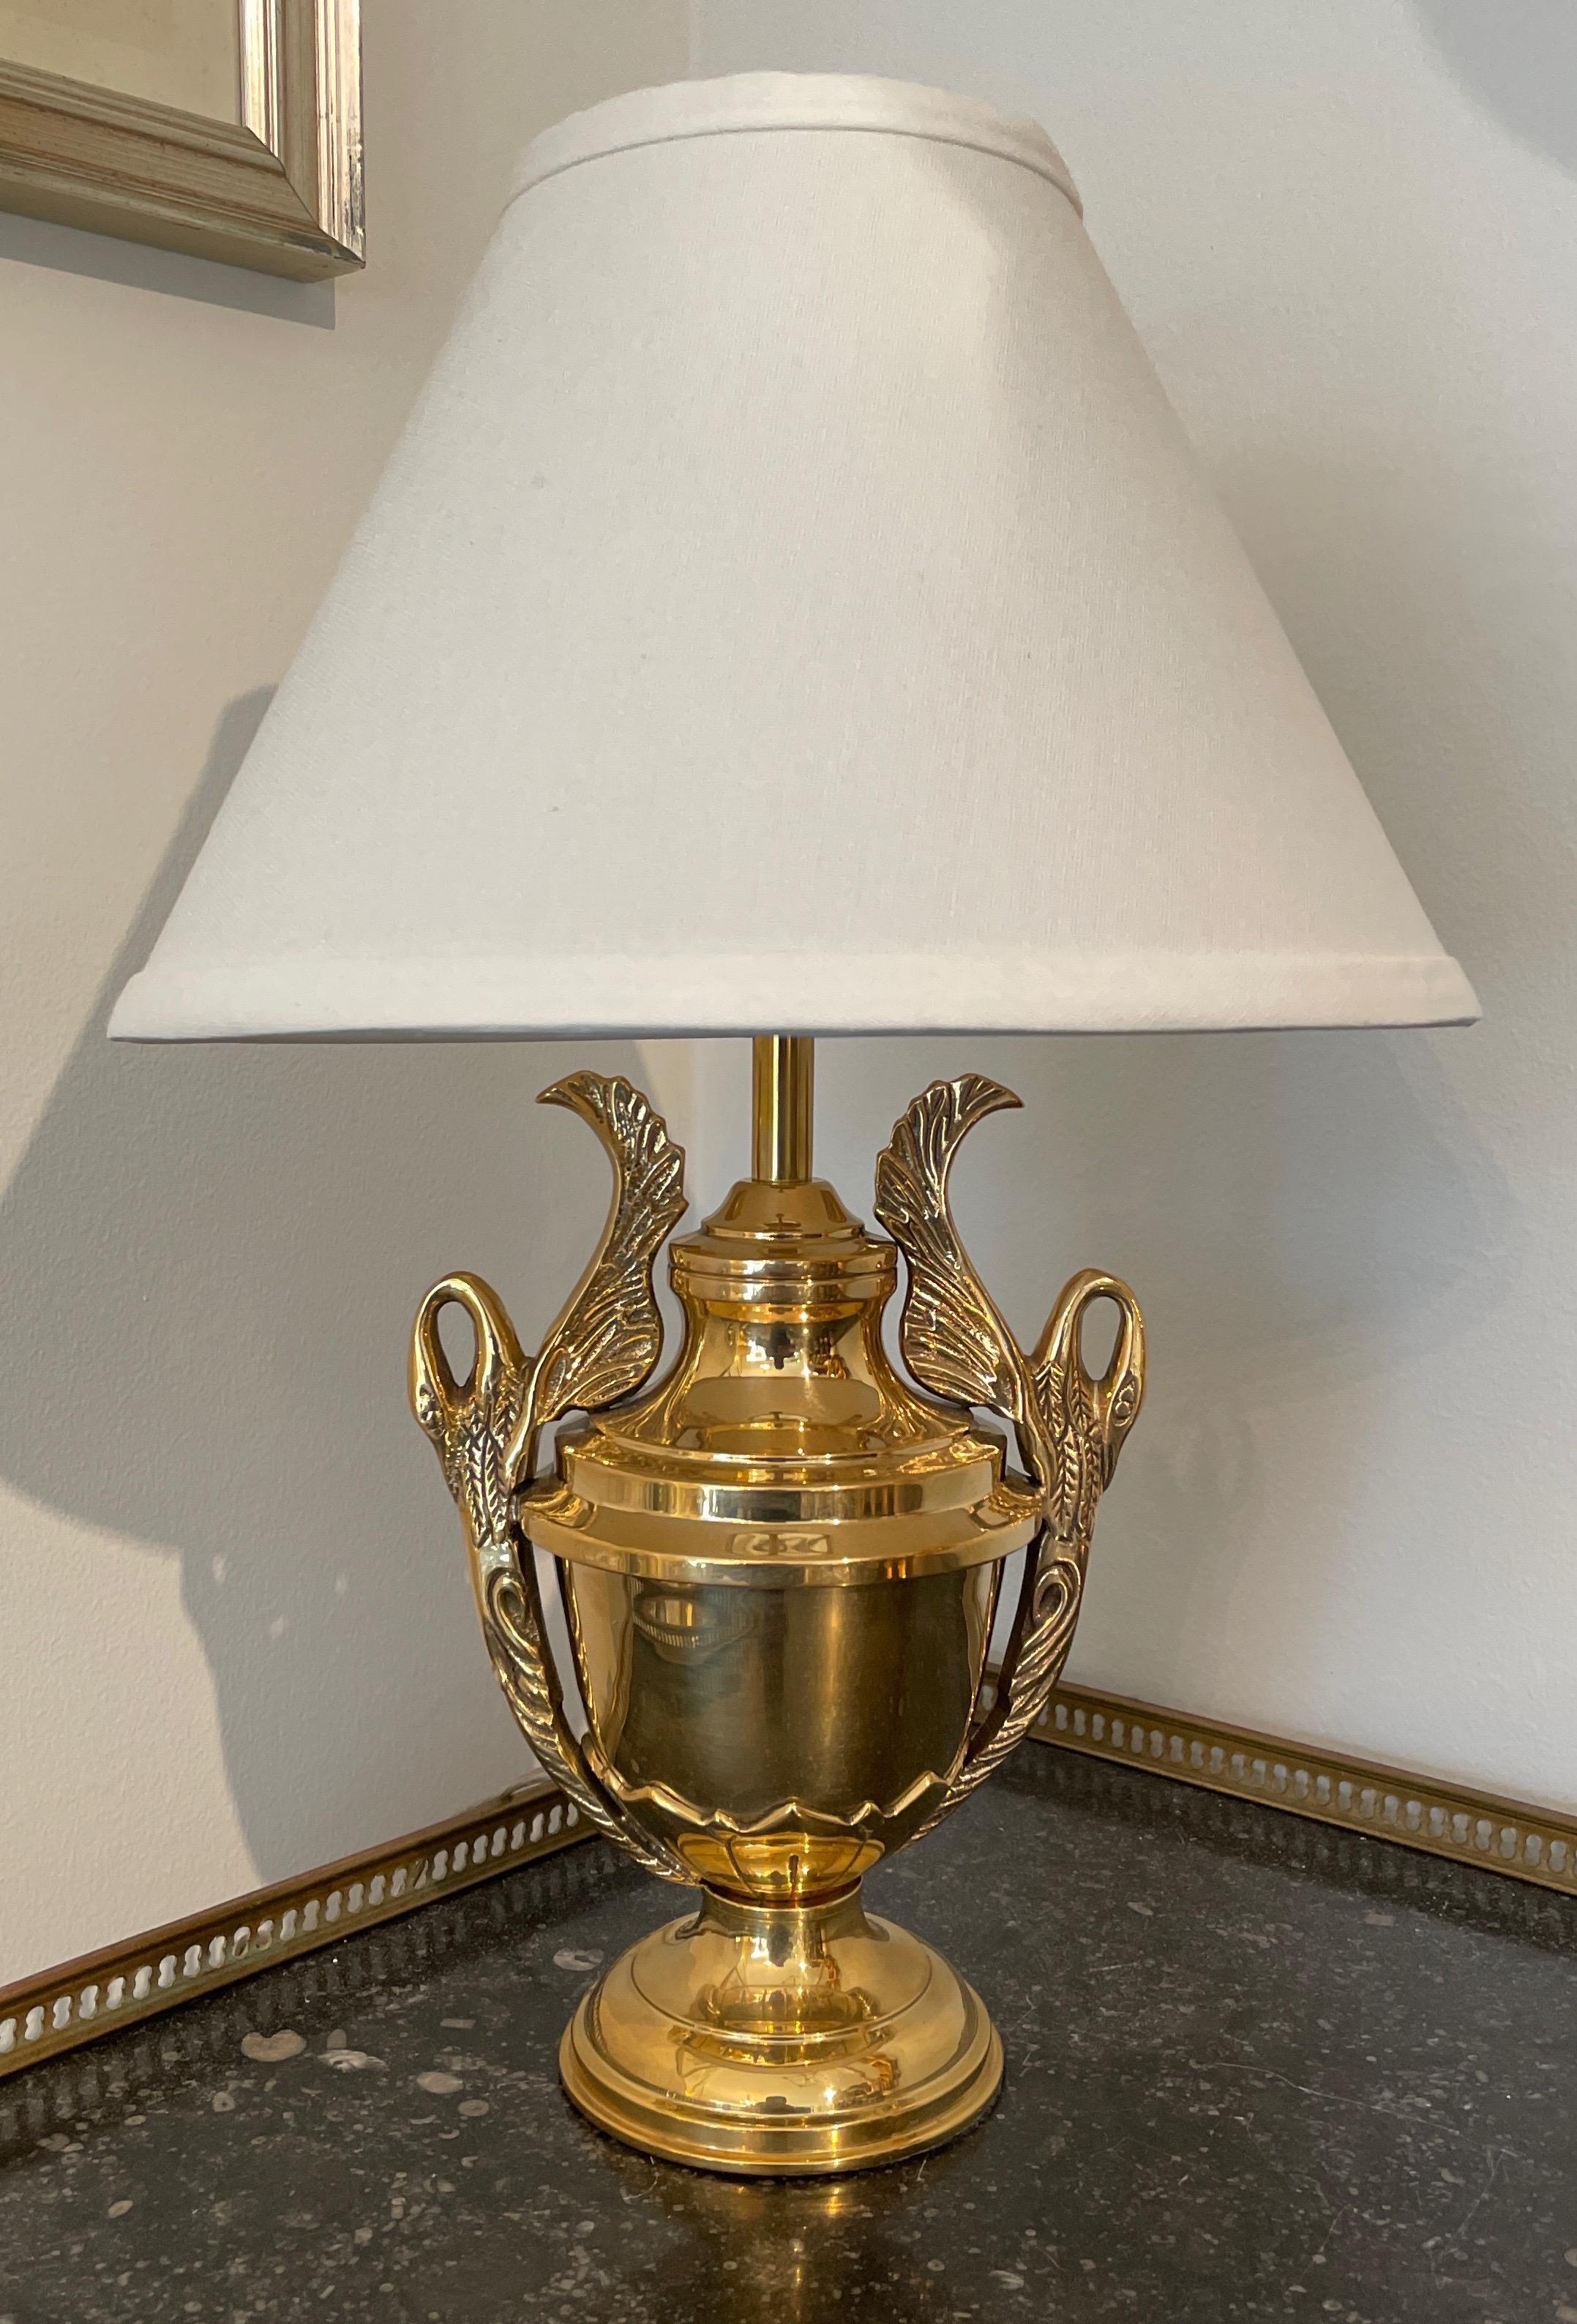 Petite solid brass Swan lamp with new white shade.